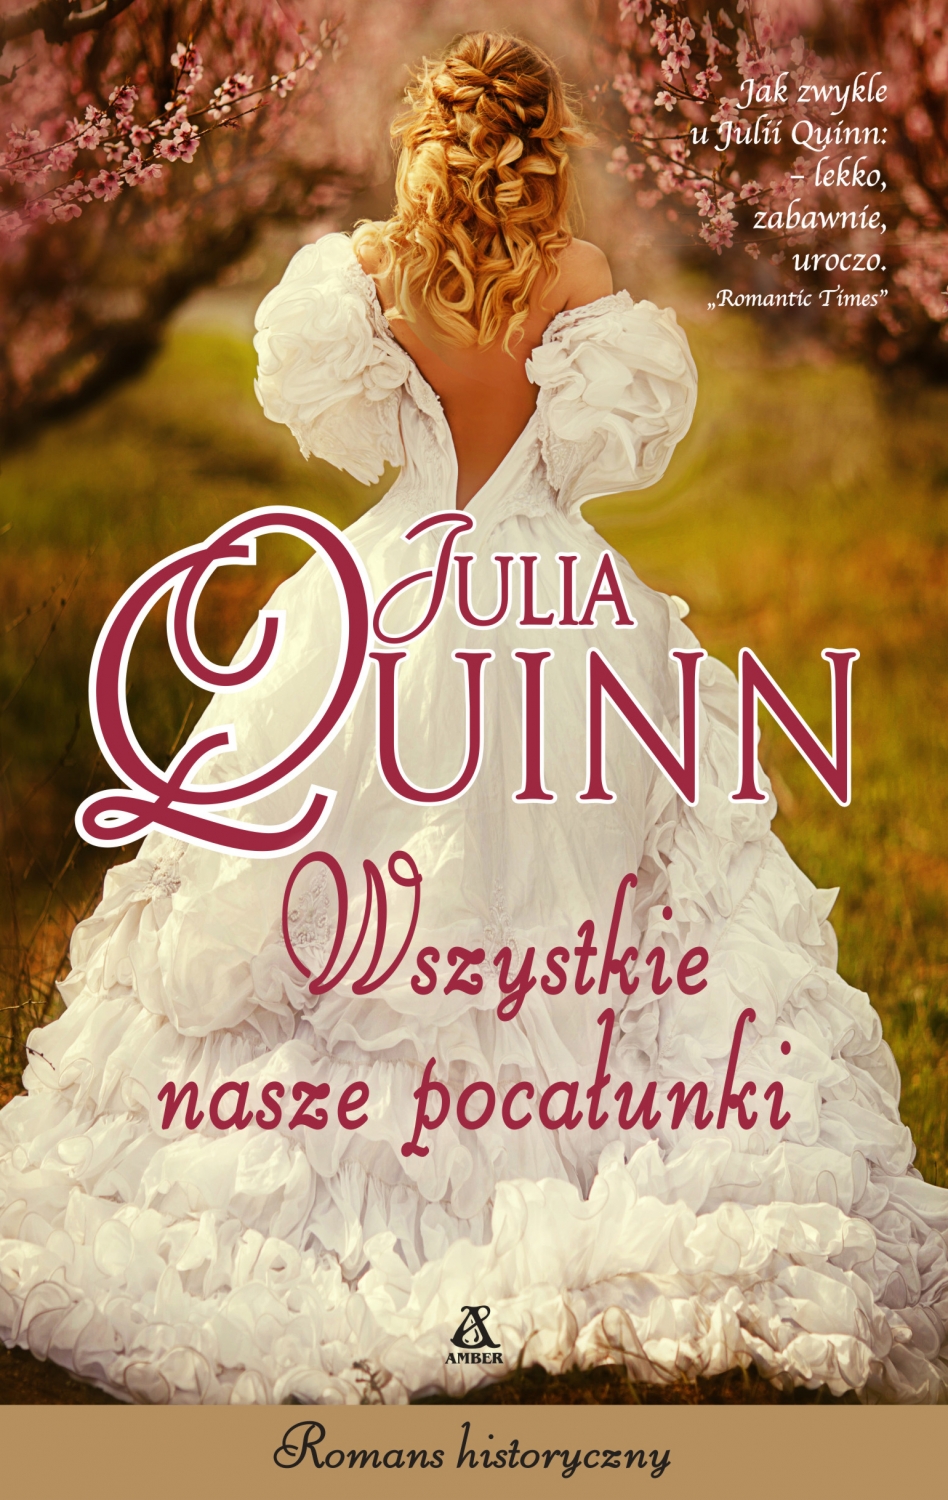 the sum of all kisses by julia quinn